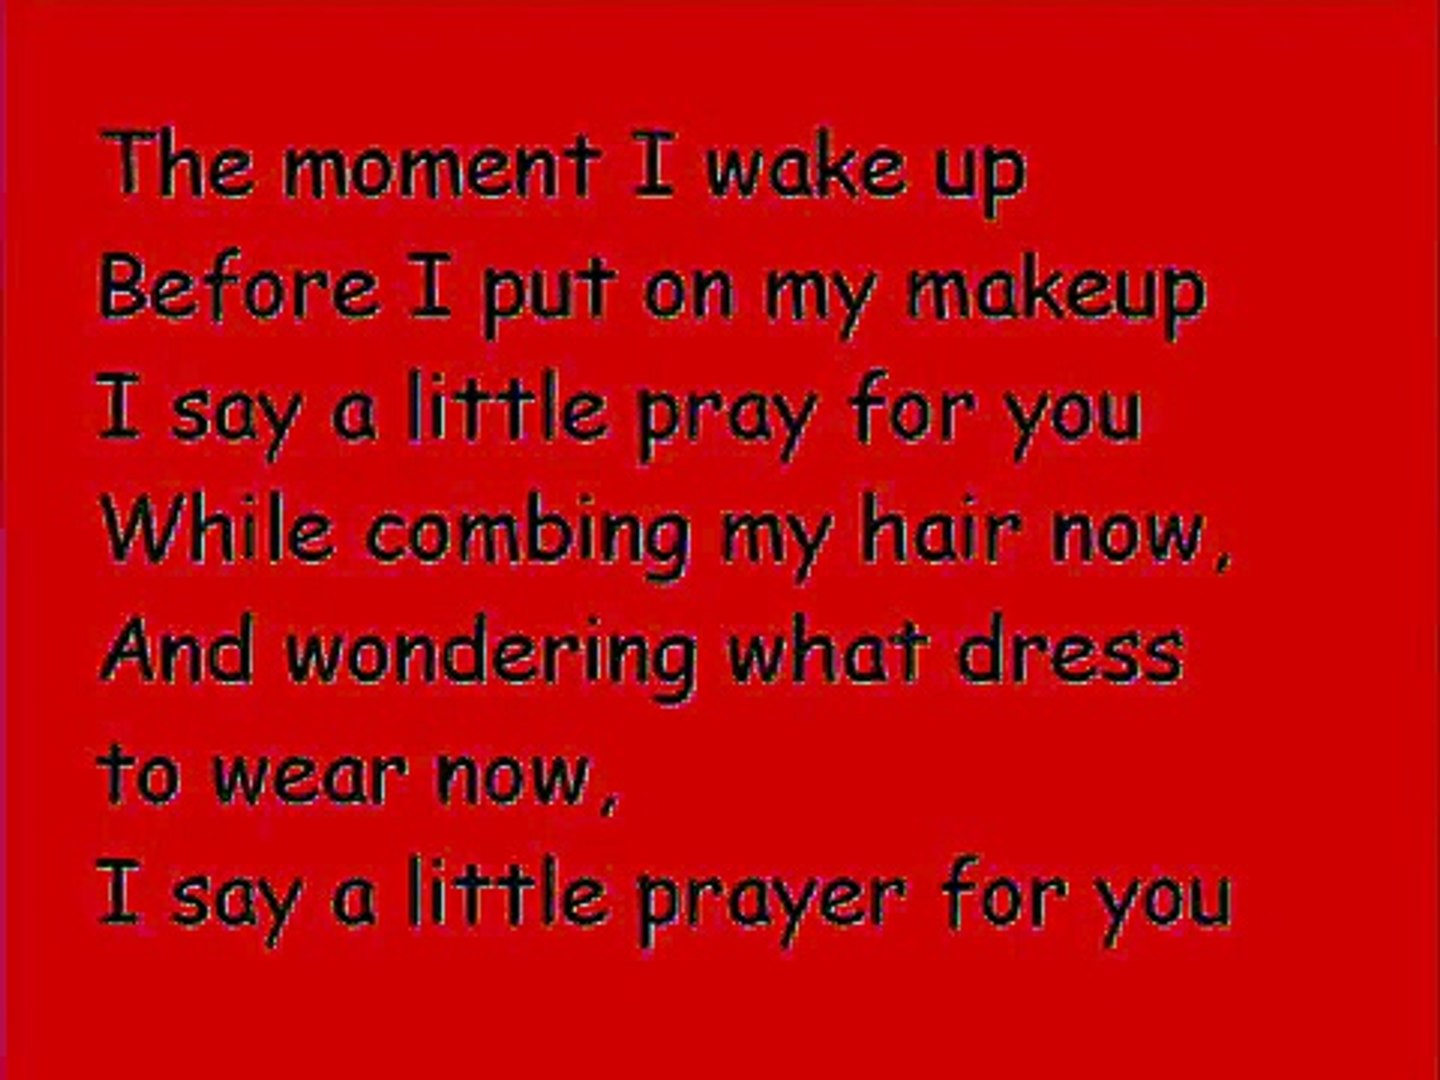 I say a little prayer for you (lyrics) - video Dailymotion